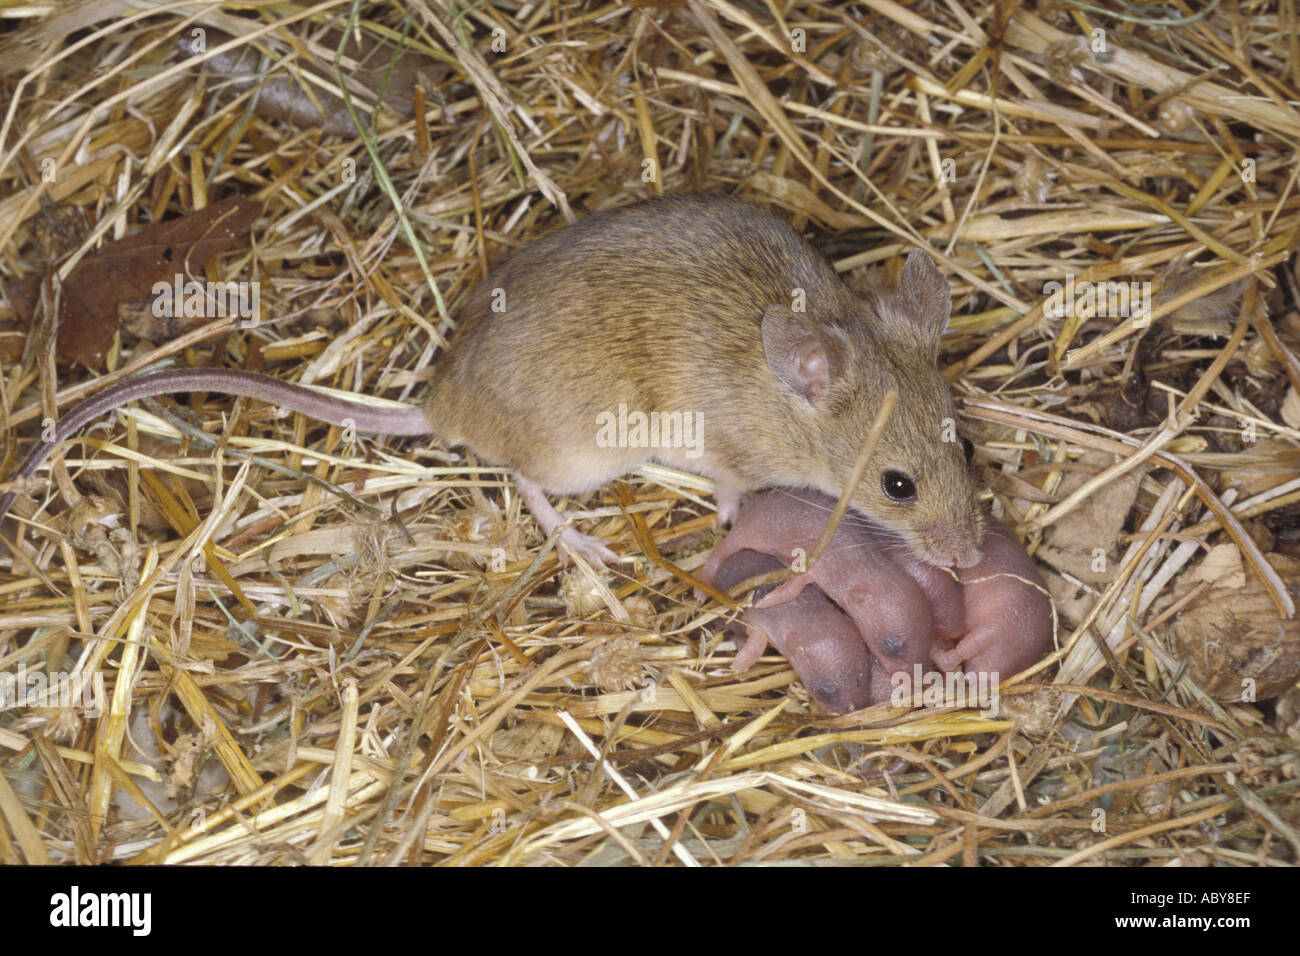 House mouse with babies Mus musculus Spain Sanz VISUAL WRITTEN Stock Photo